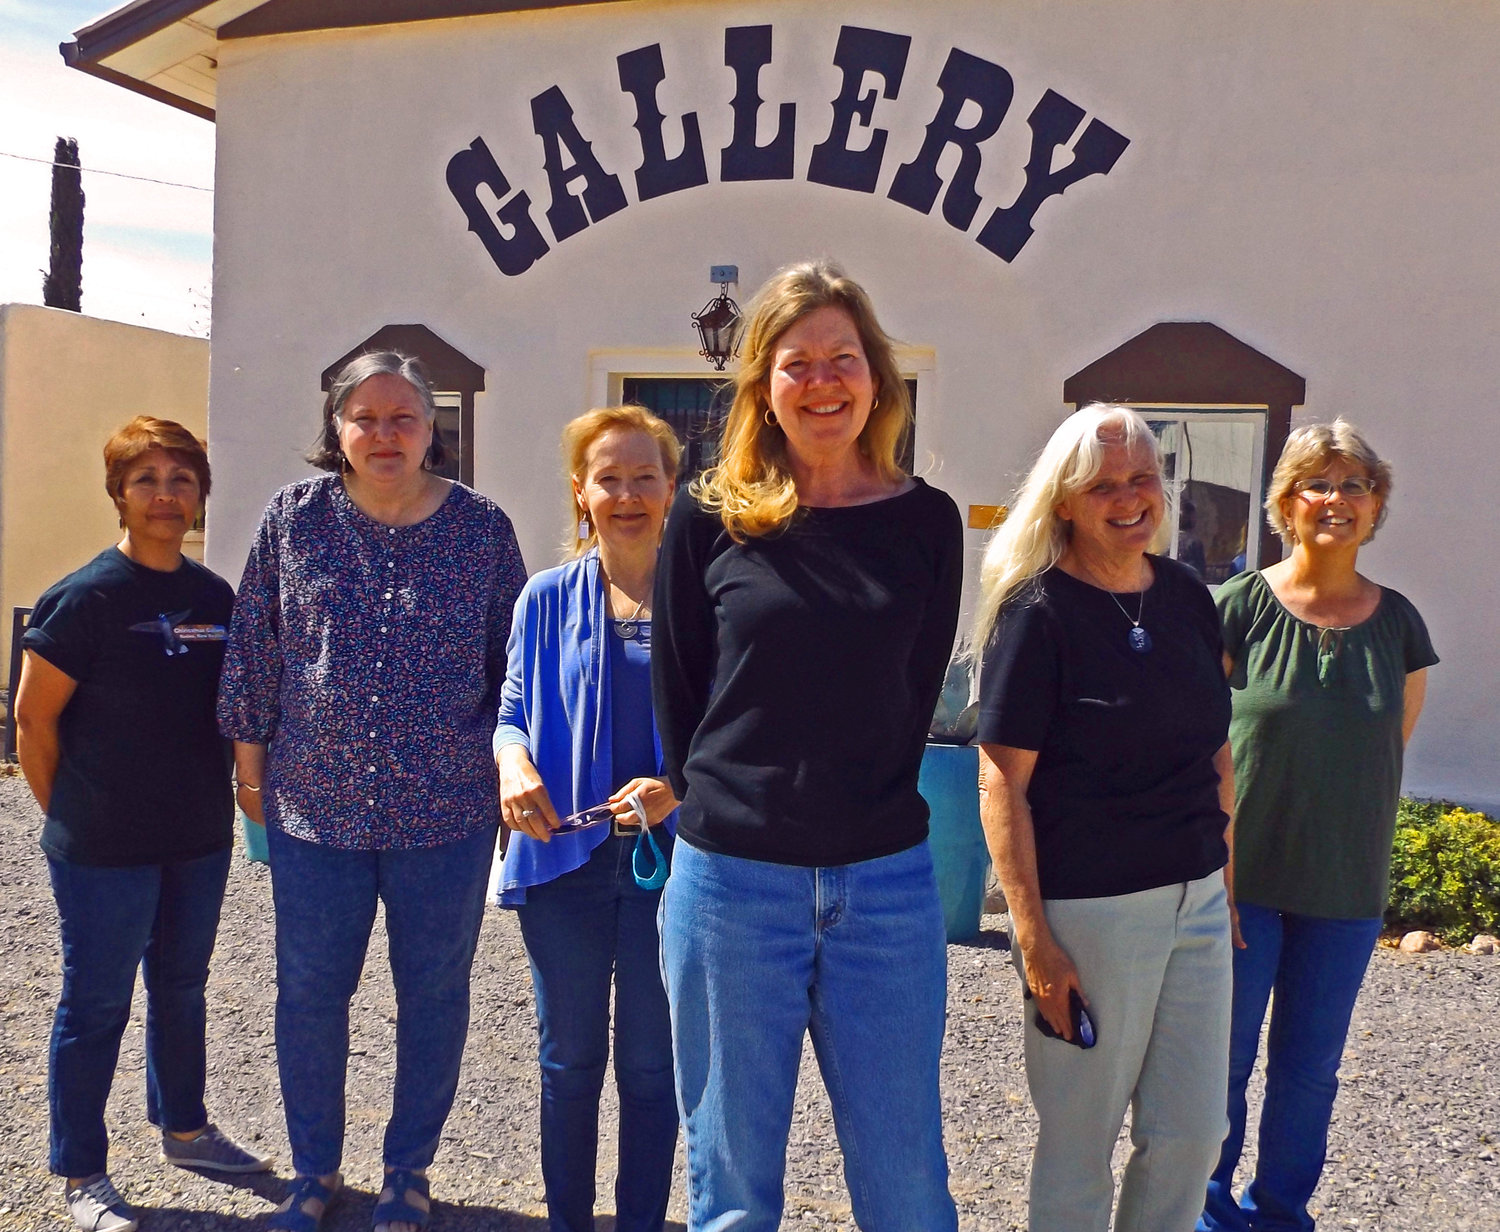 Chiricahua Art Gallery Board Members: (left to right) Eva Escalante, Alicia Christensen, Julie Prior-Magee; (center) Joan McAvoy, president; Joanne Snowdon, Deb Bernard, (not-pictured) Loy Guzman.  They represent more than 35 artists and crafts people featured in this year’s annual Spring Show at the Rodeo based art gallery steeped in “old frontier”lore.